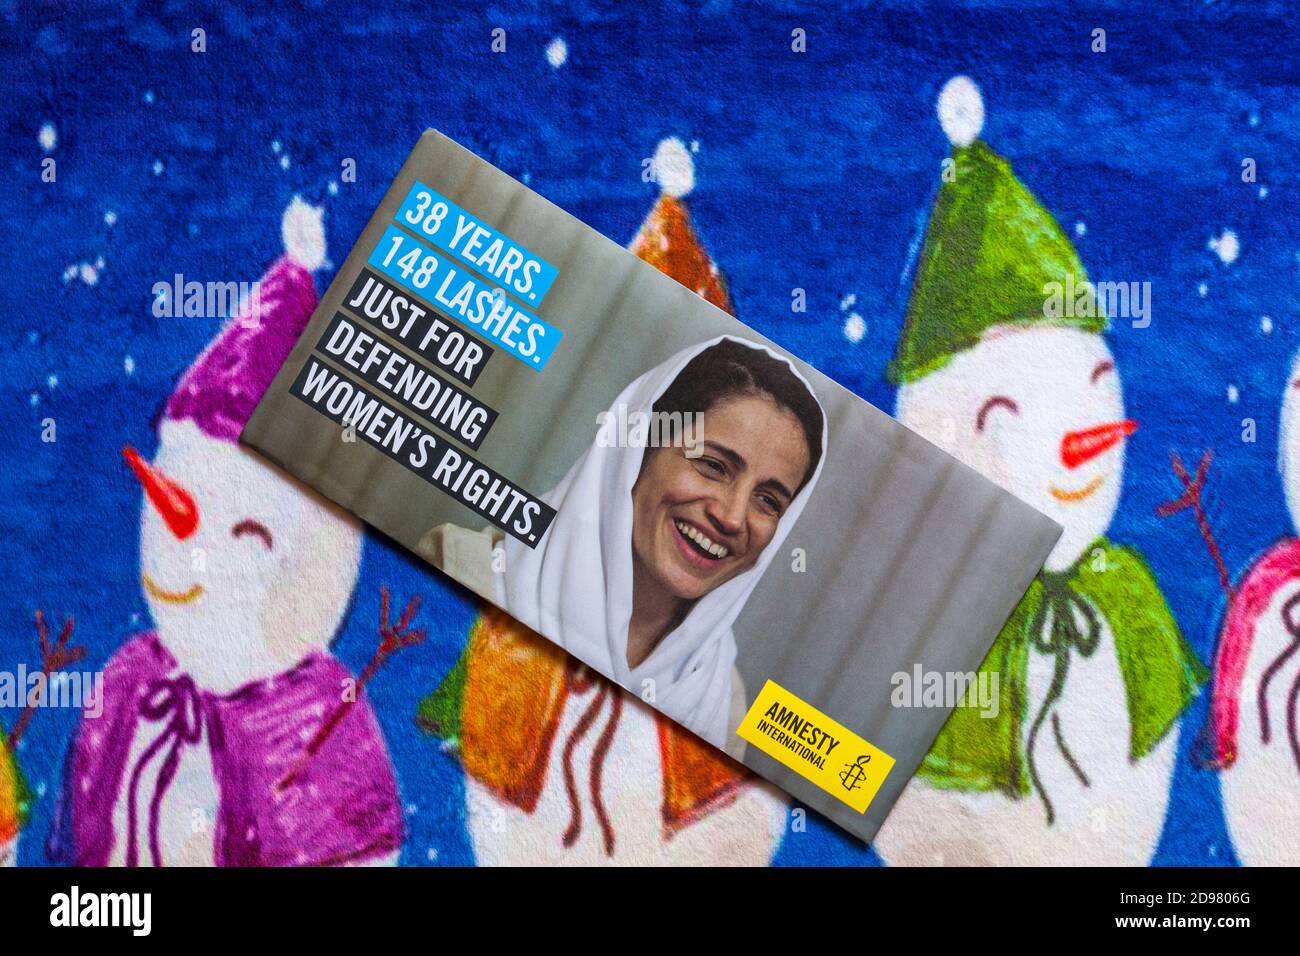 Post on Christmas mat - charity appeal, Amnesty International 38 years 148 lashes just for defending women's rights Stock Photo